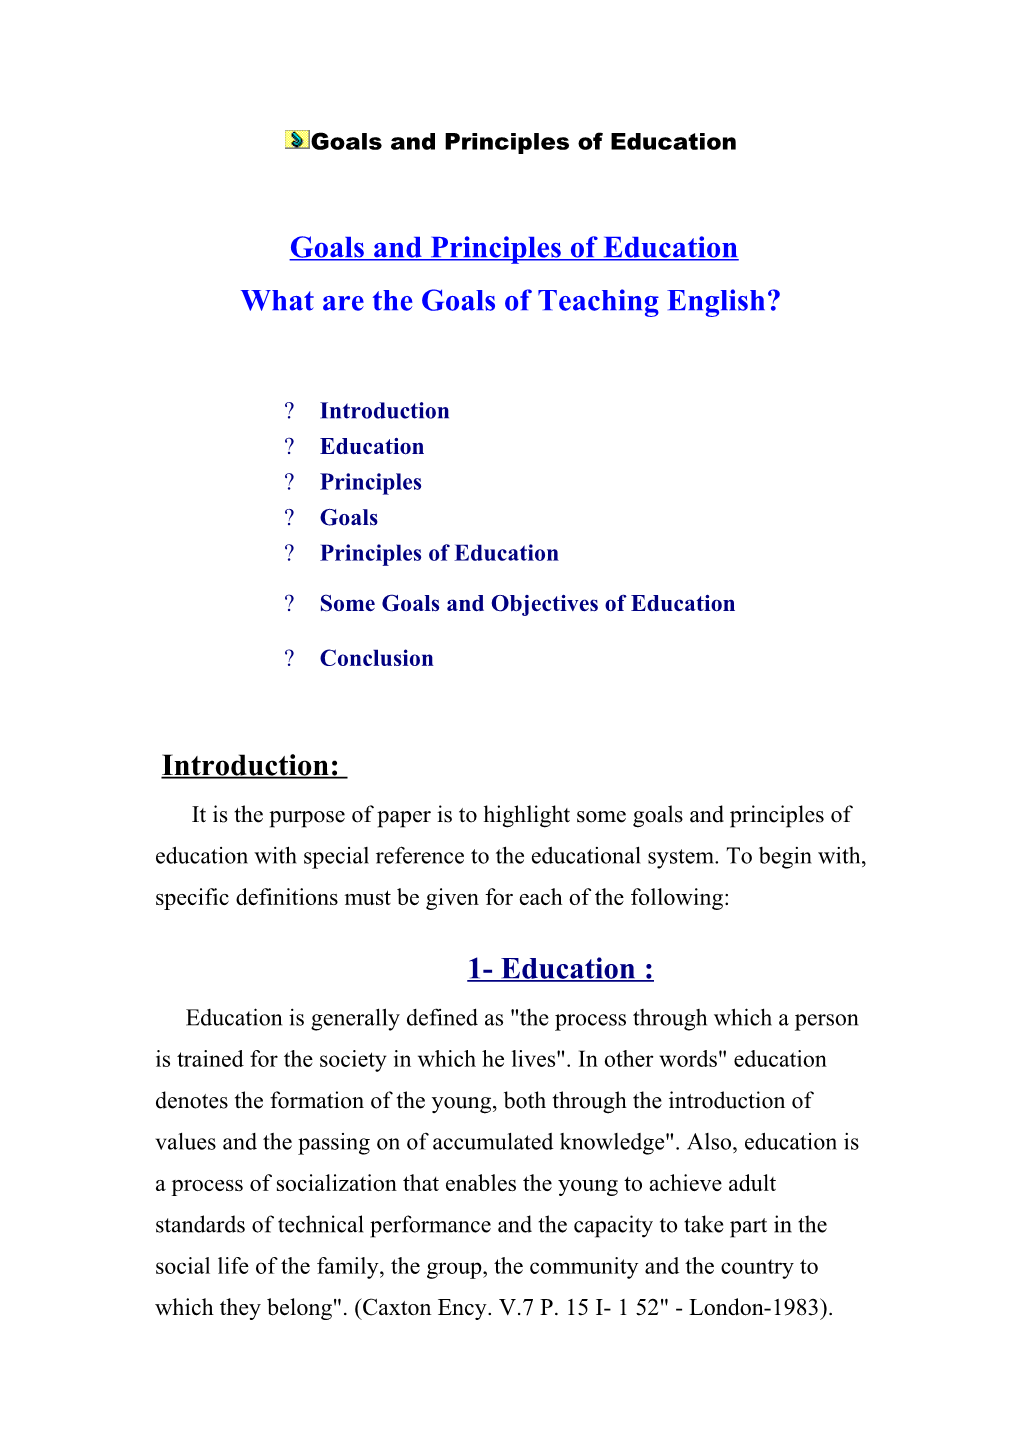 Goals and Principles of Education